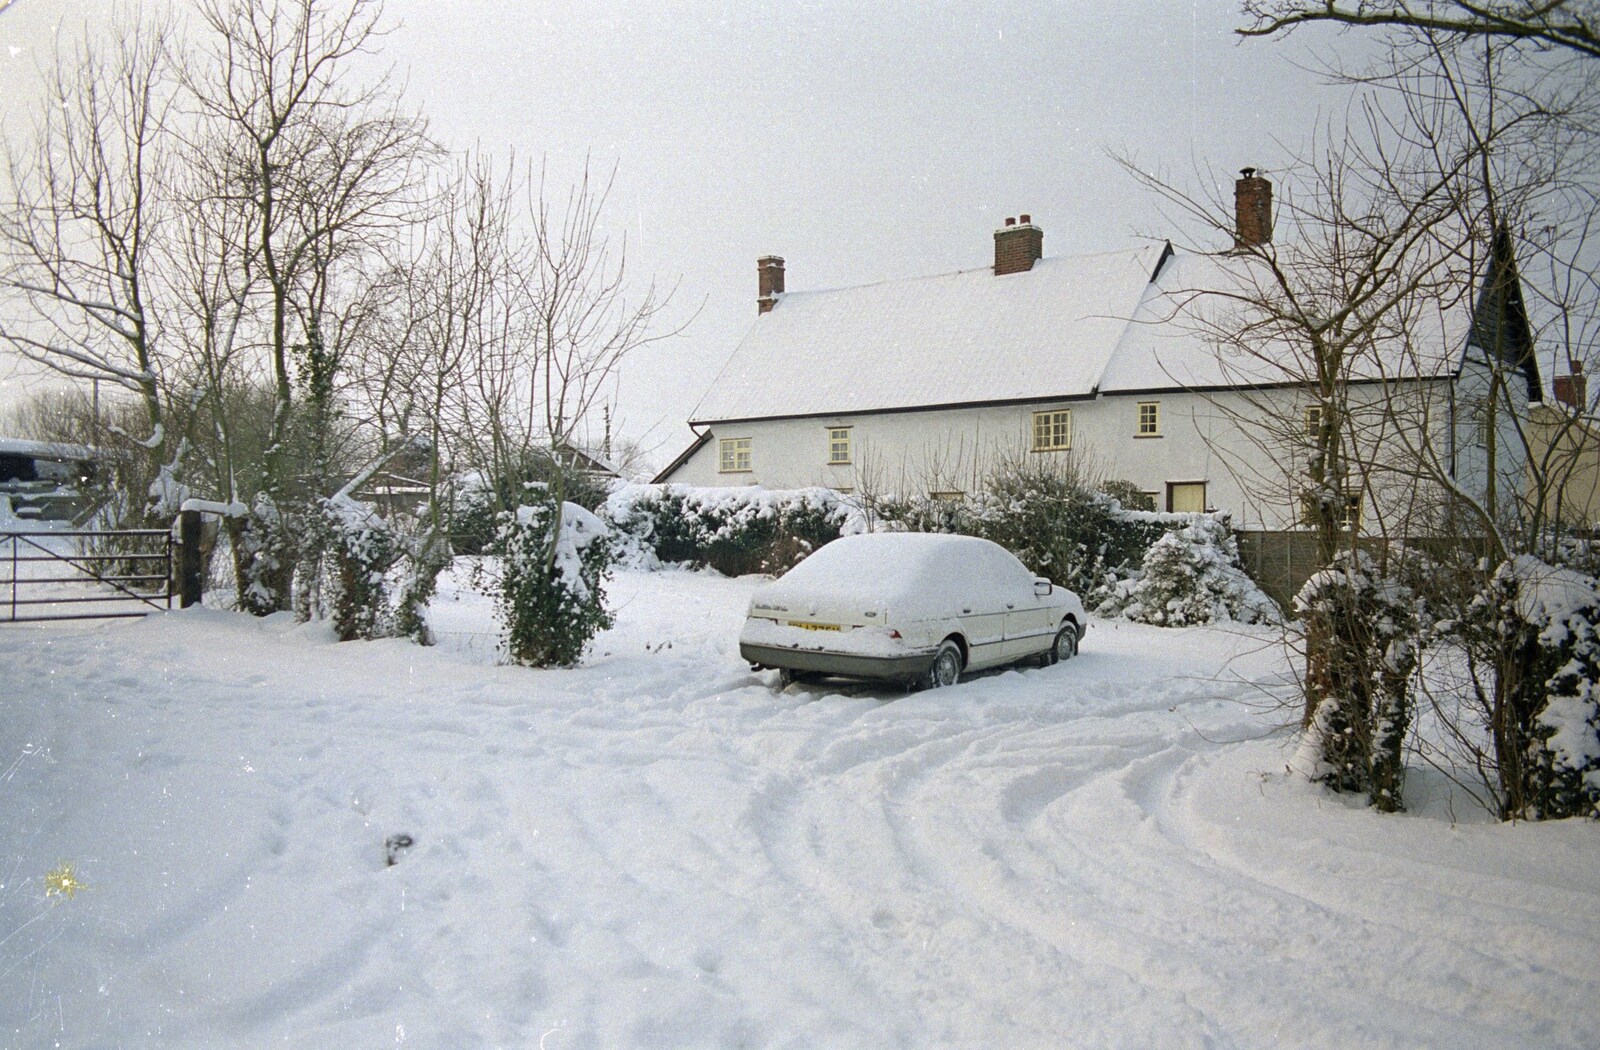 David Hoffman's car is under there somewhere from Snow Days, Stuston and Norwich, Suffolk and Norfolk - 4th February 1991